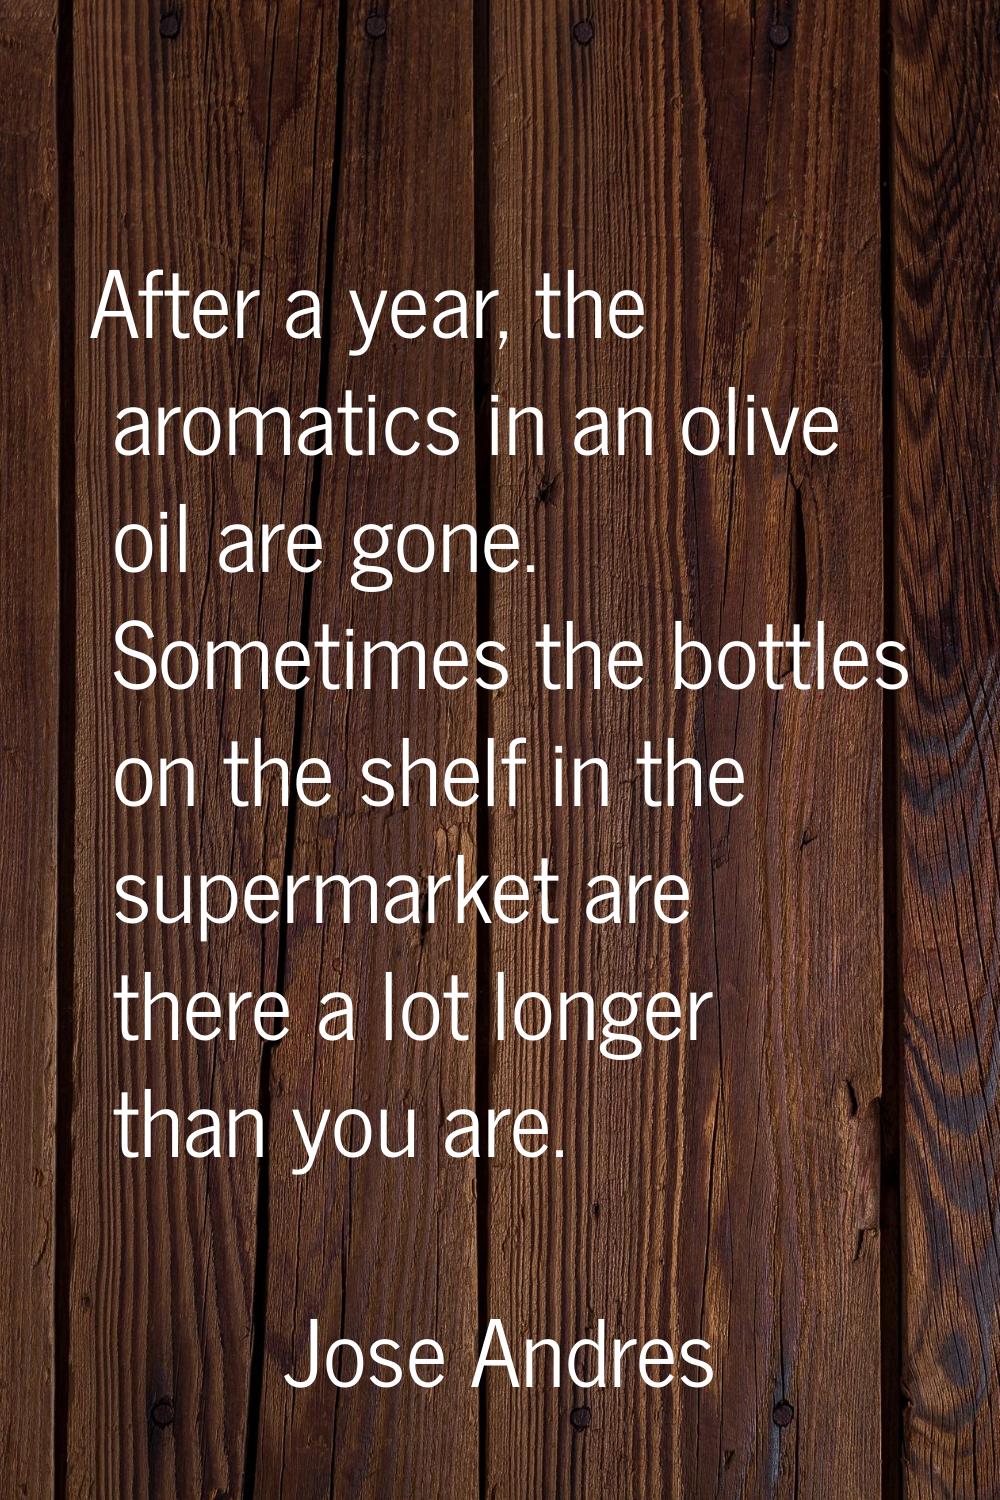 After a year, the aromatics in an olive oil are gone. Sometimes the bottles on the shelf in the sup